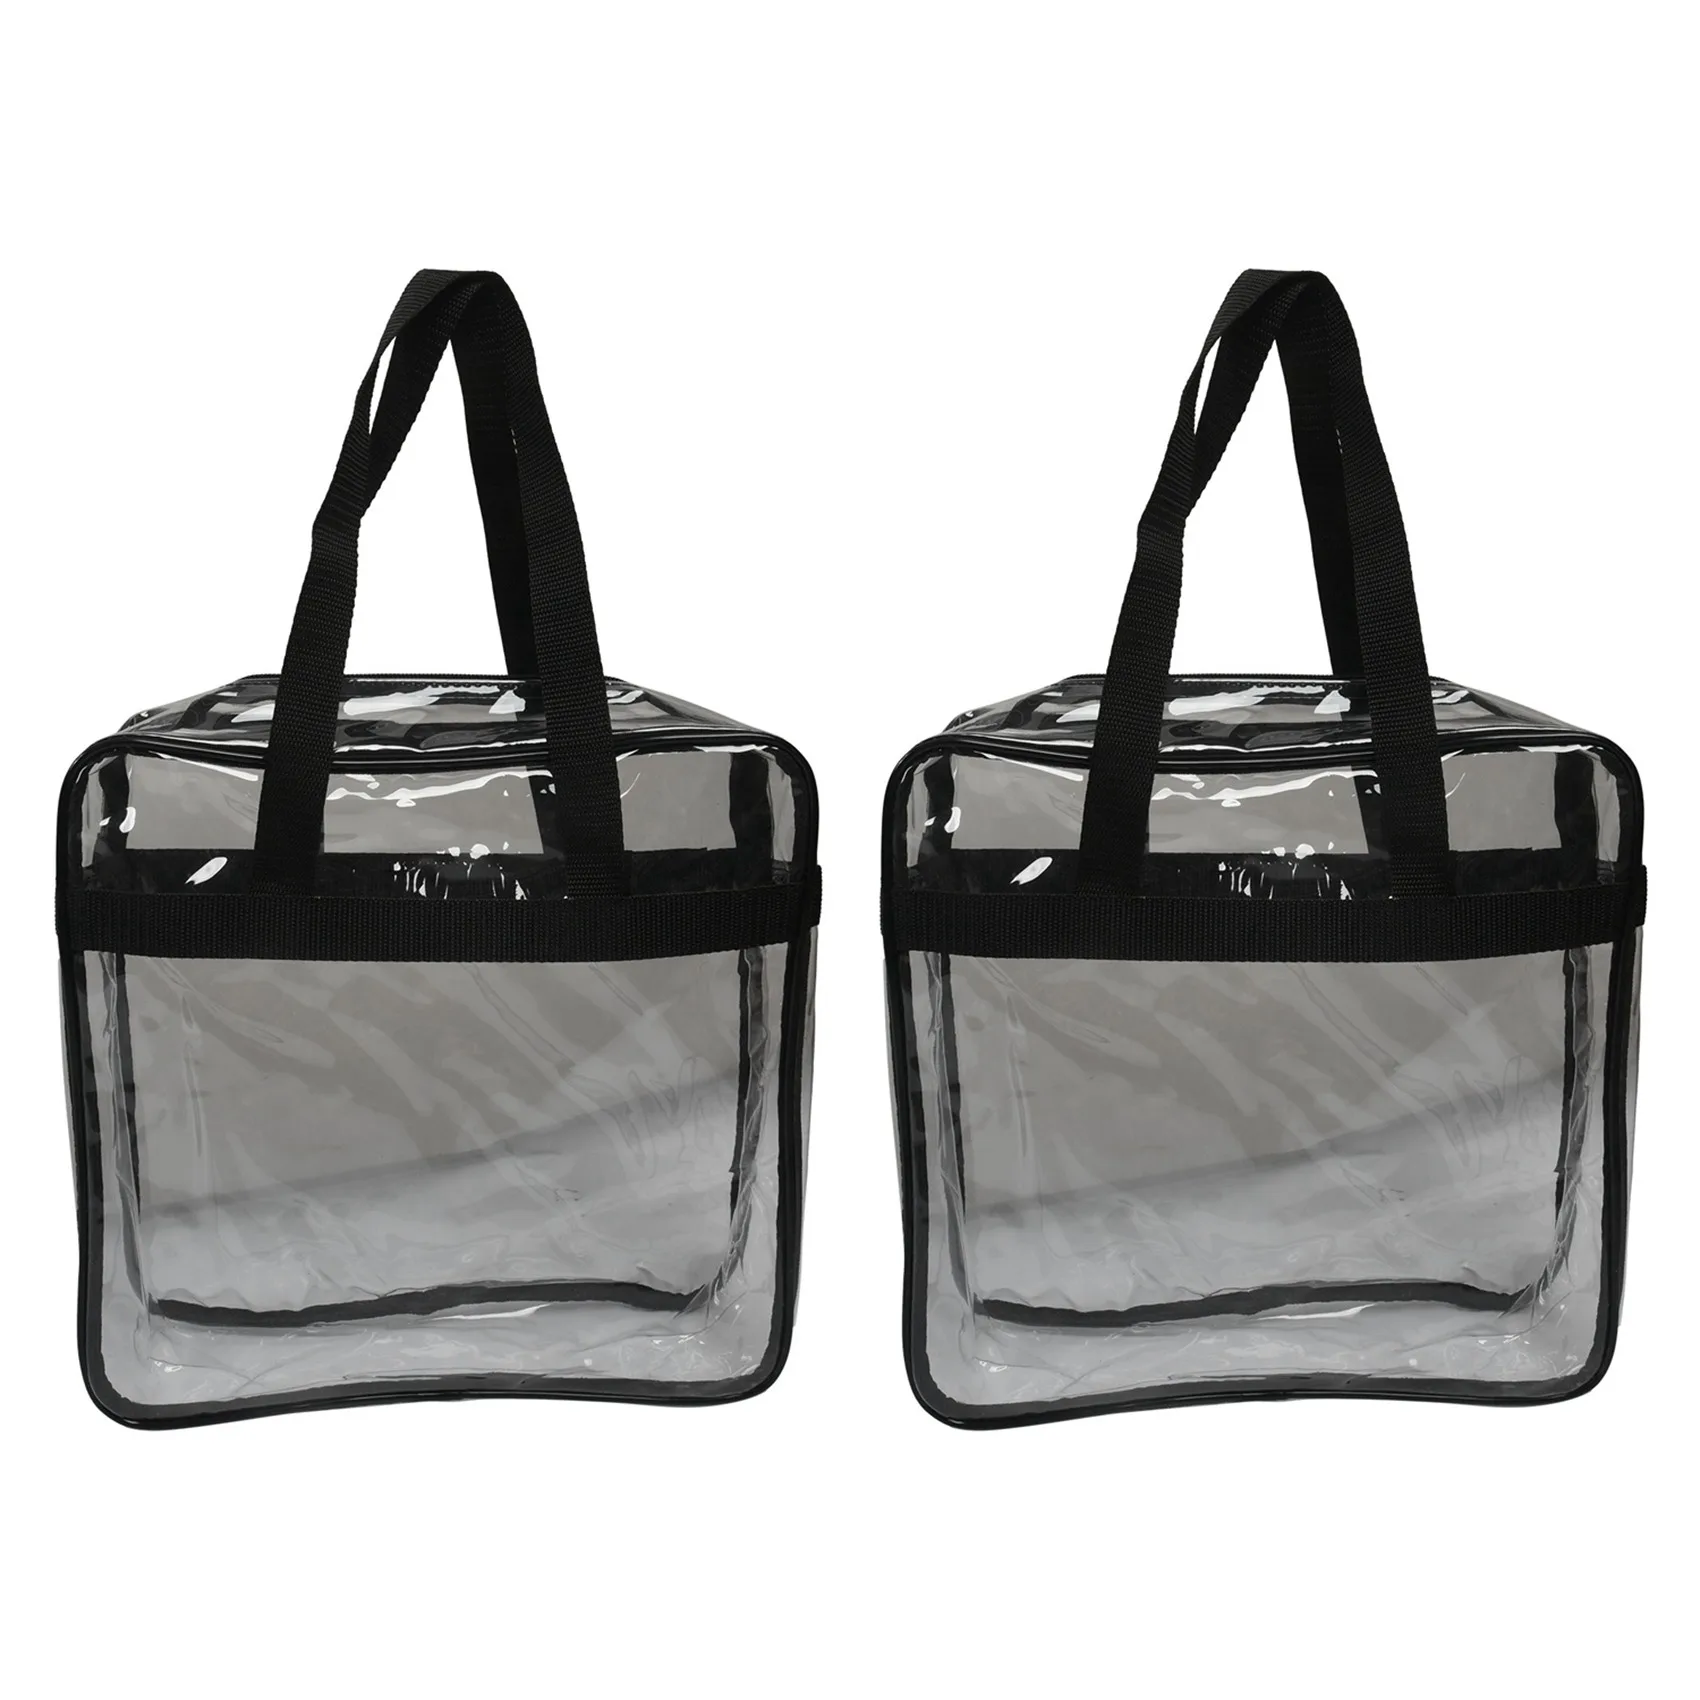 

Tote Bag, Sturdy PVC Construction Zippered Top,Stadium Security Travel & Gym Clear Bag, Perfect for Work, School, 2 Pcs